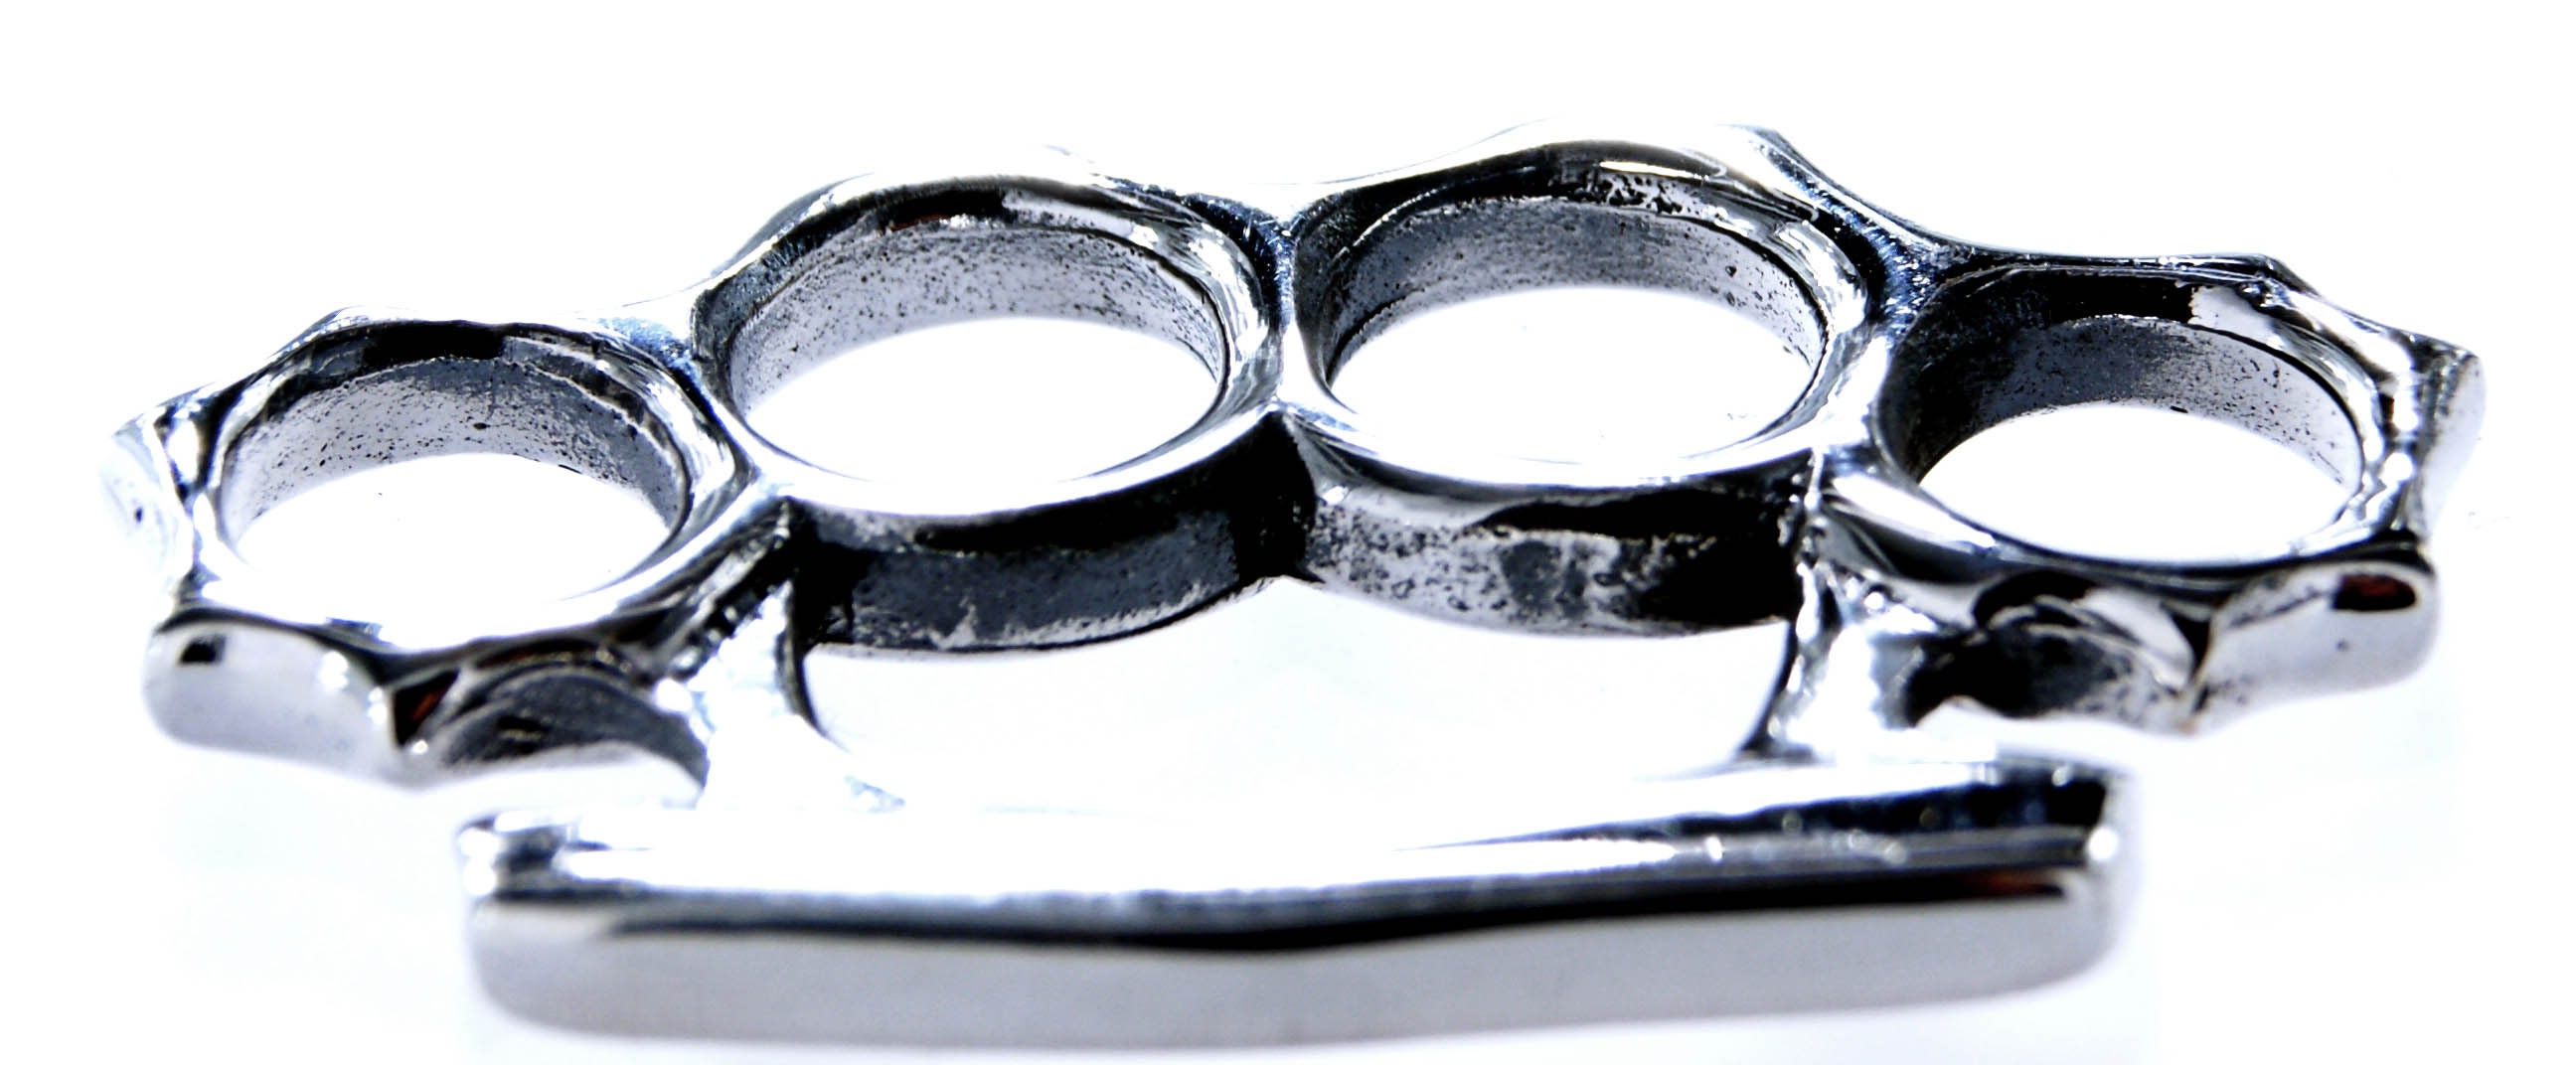 A Punch with Brass Knuckles Stock Photo - Image of hancu, bind: 118450468